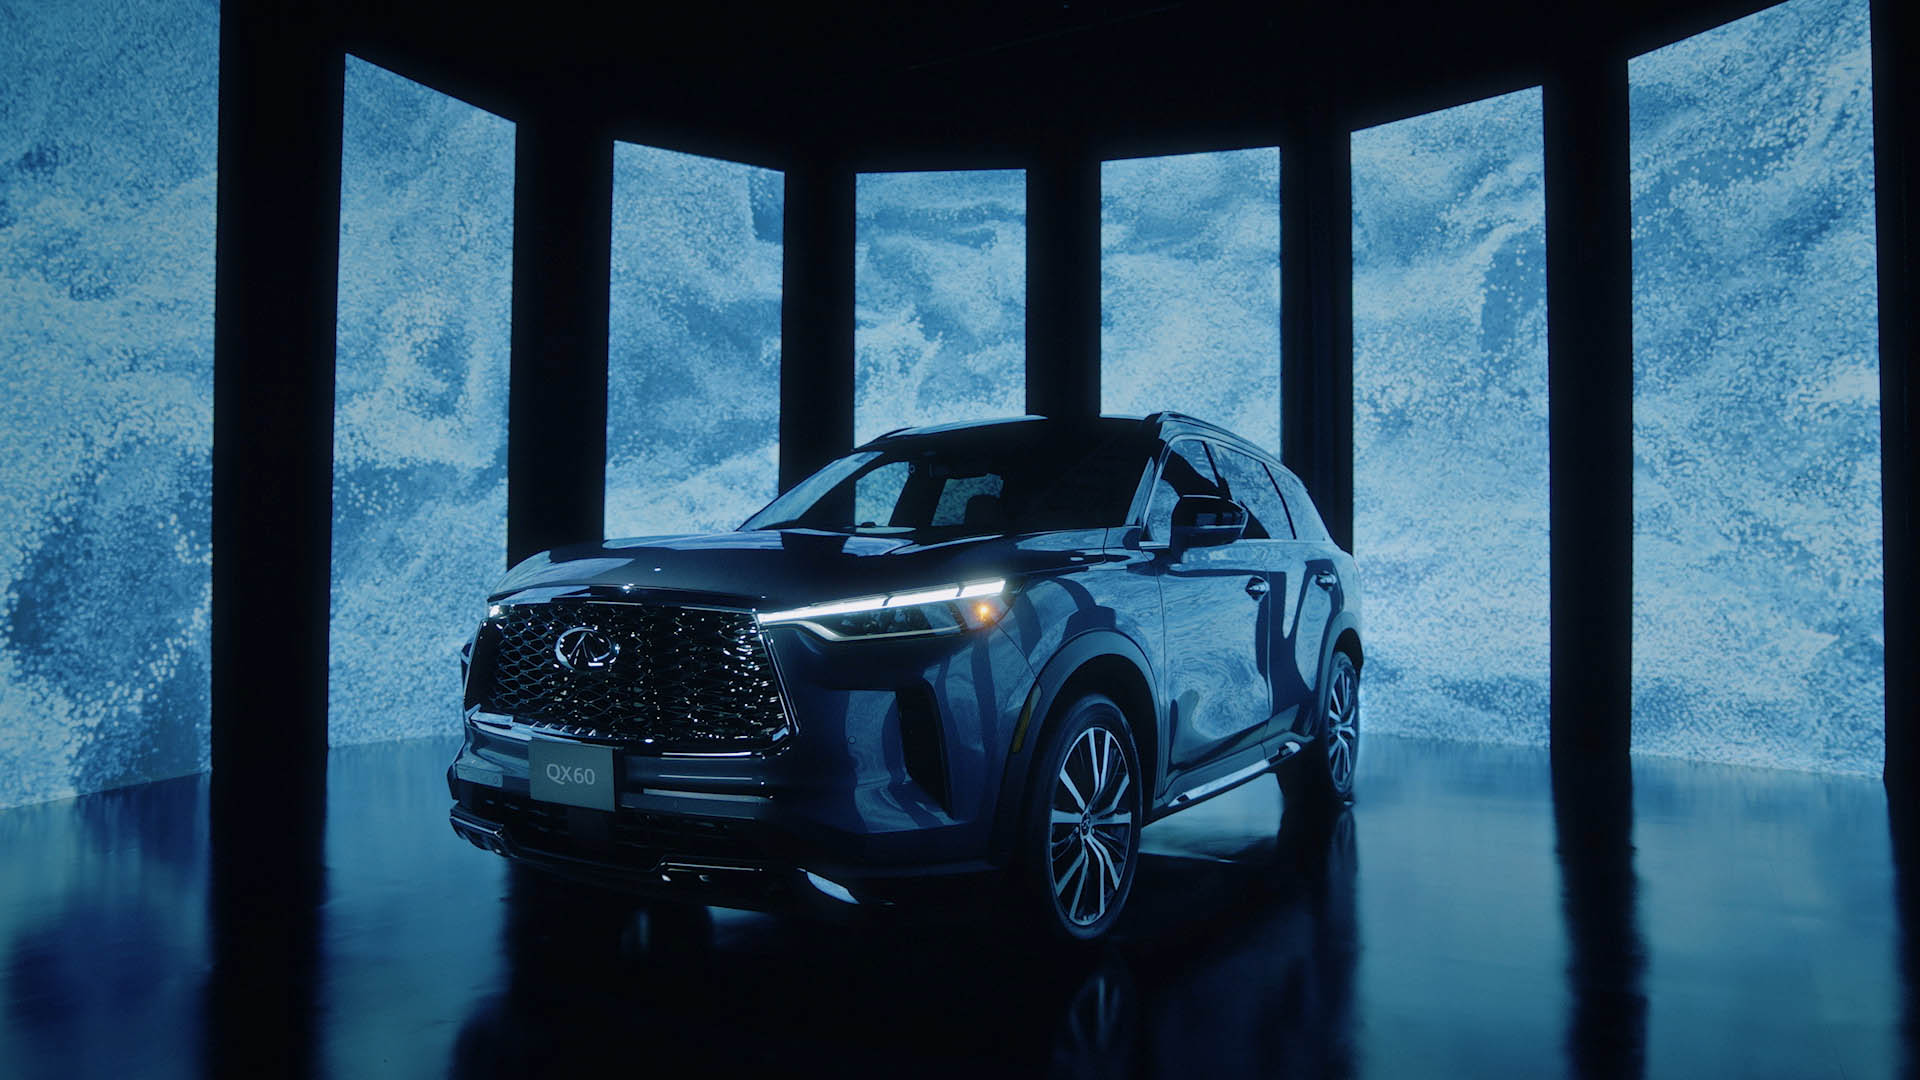 Infiniti Artfully Brings Inimitable Pigment to Life In An Immersive Digital Experience